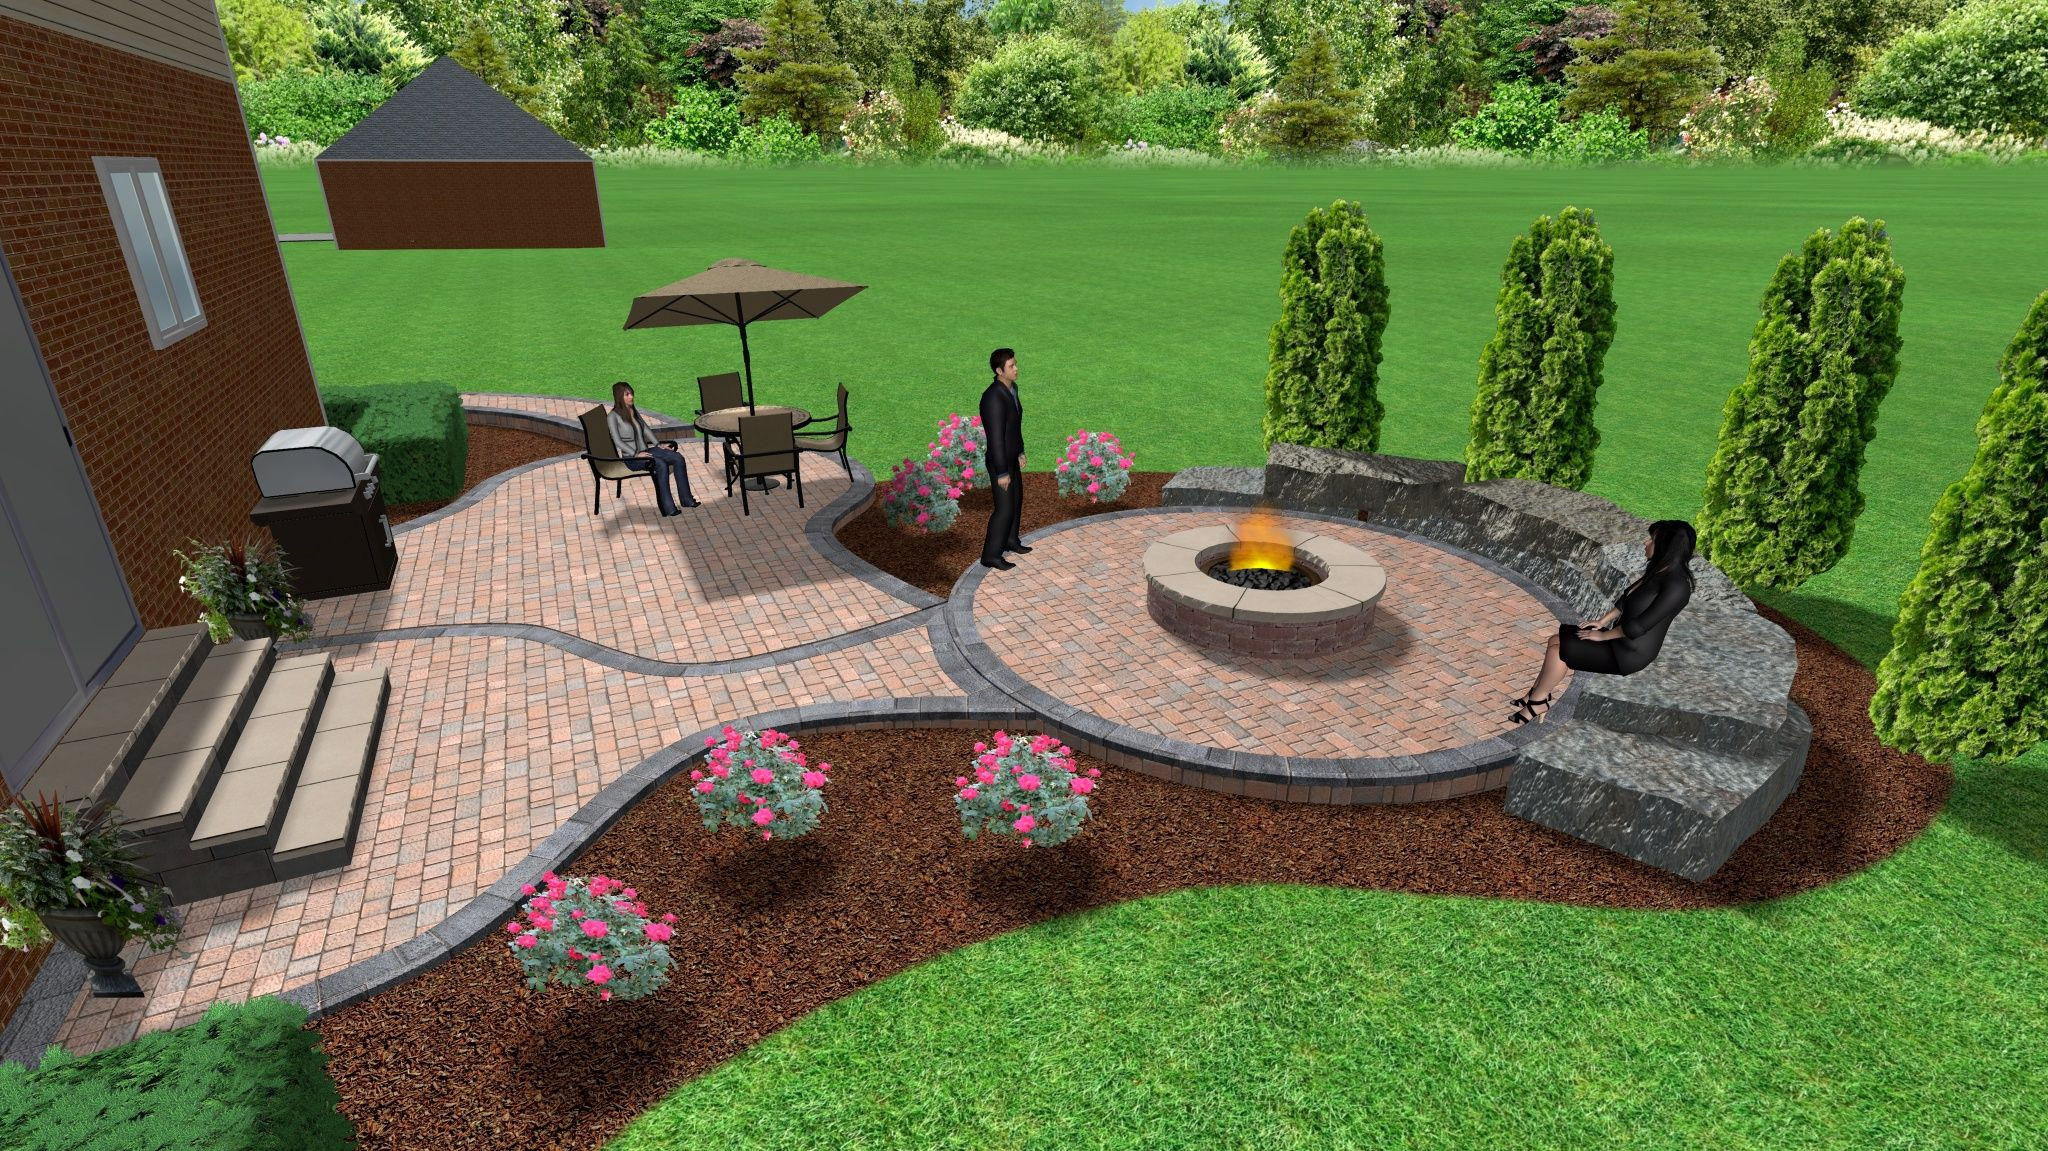 Backyard Design With Fire Pit
 Brick paver patio and fire pit